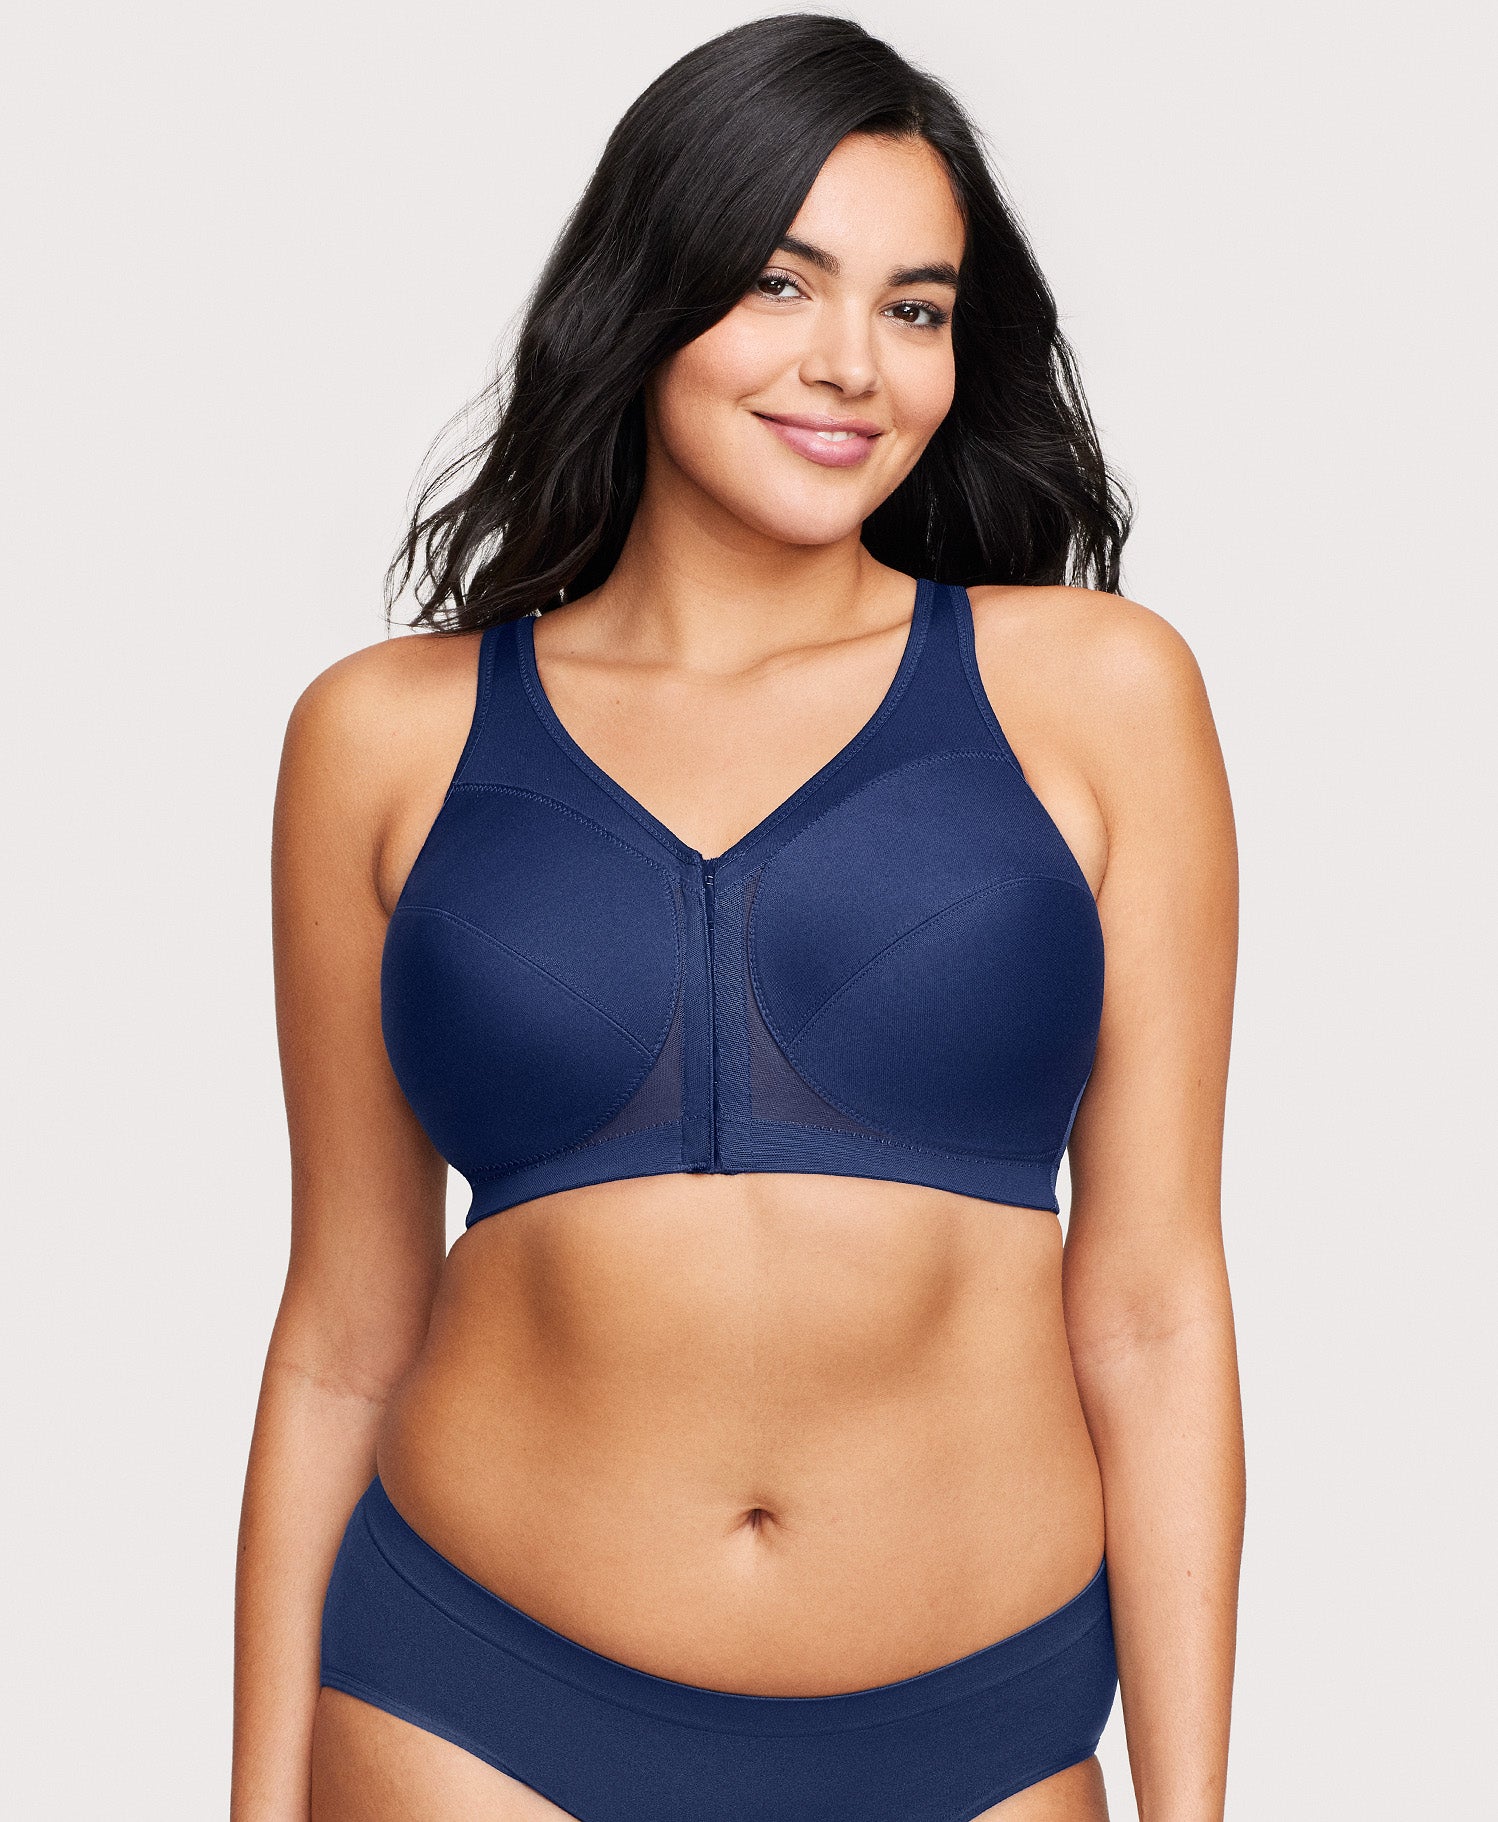 I Love Your Style Padded Bra Blue 36D Front Close